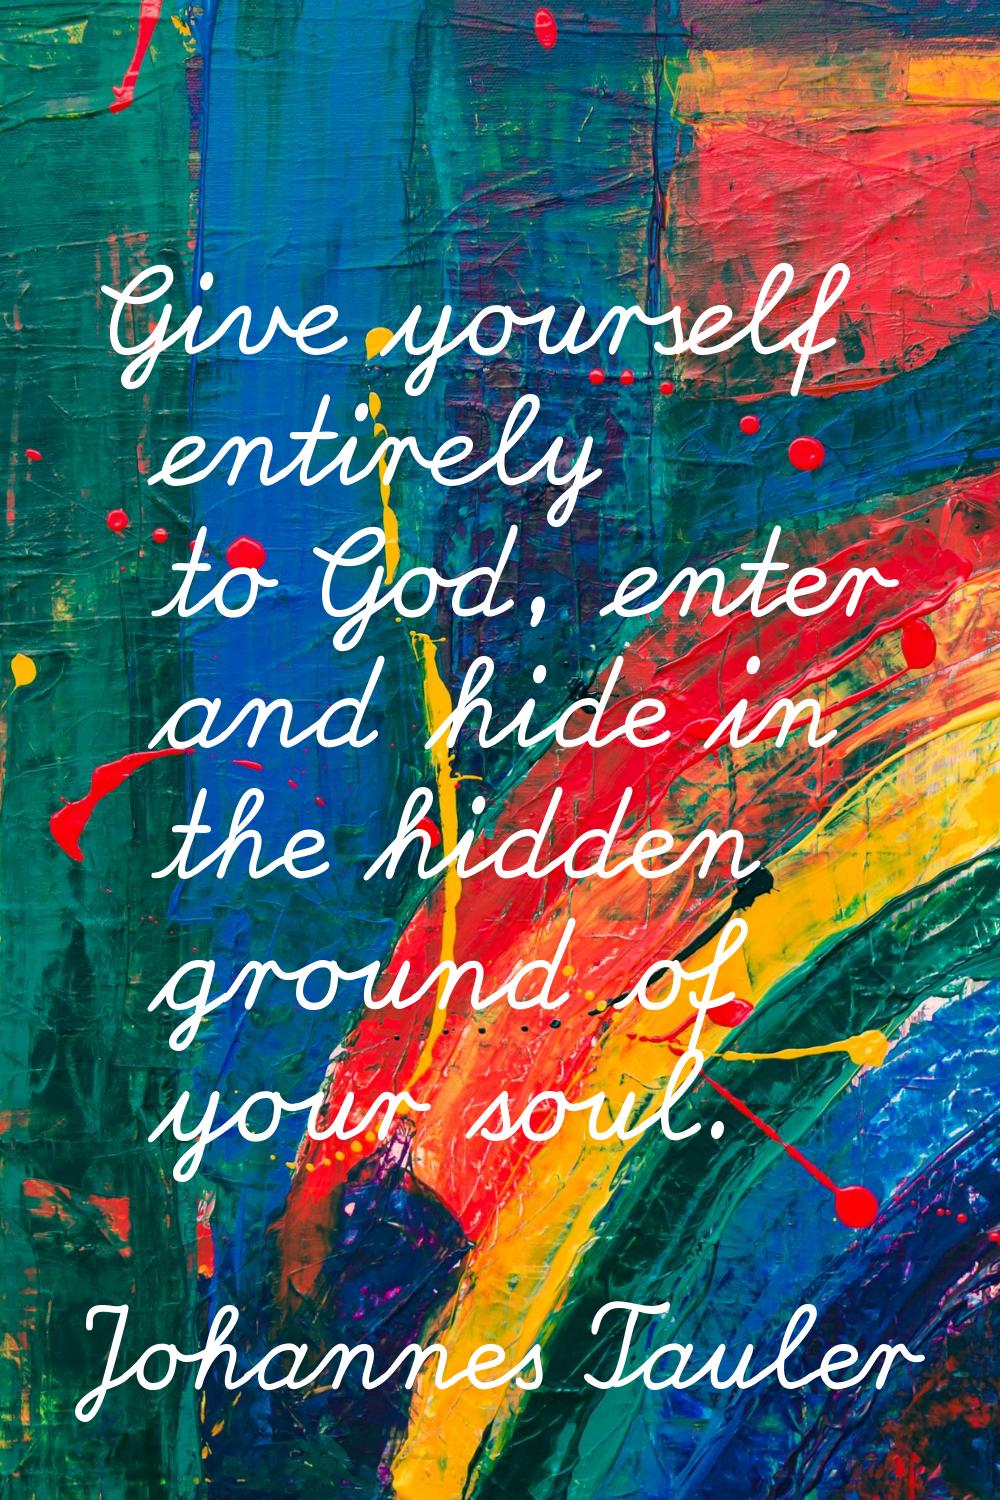 Give yourself entirely to God, enter and hide in the hidden ground of your soul.